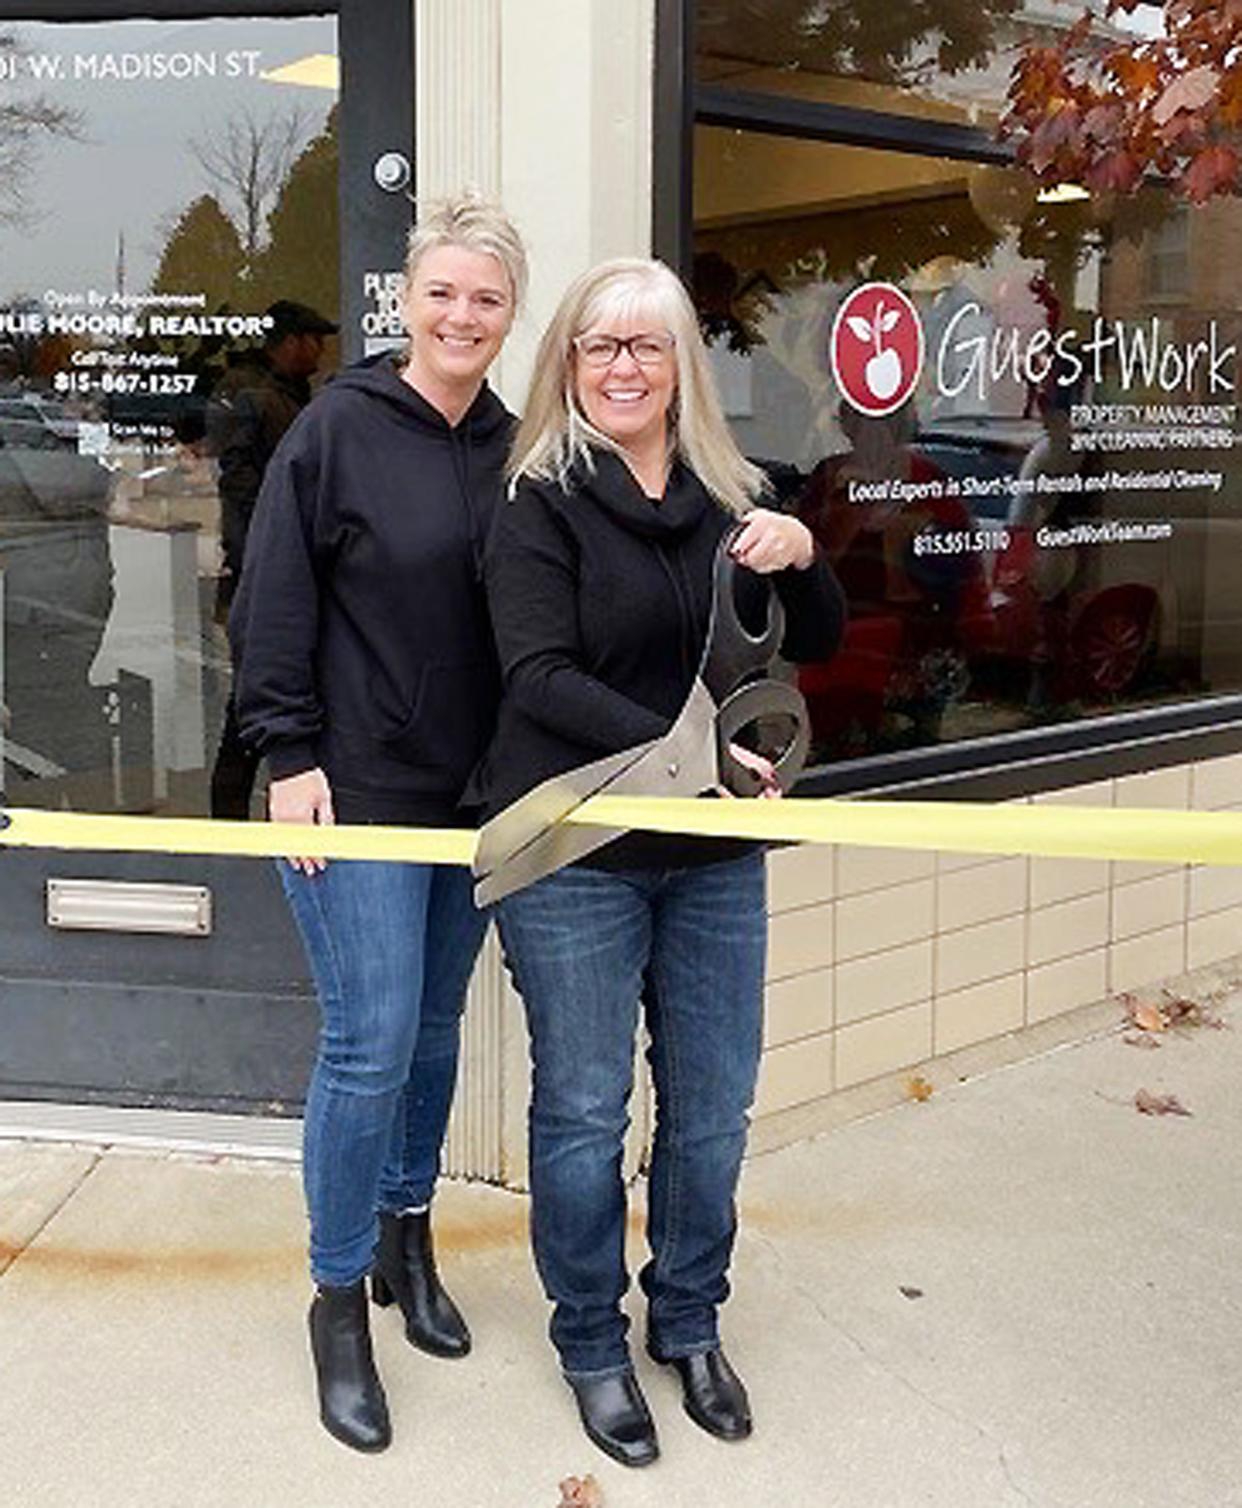 Aubrey Graves and Julie Moore of the Vision Homes Group, RE/MAX Rising Team pose before cutting a ribbon to their new business at 201 W. Madison St.